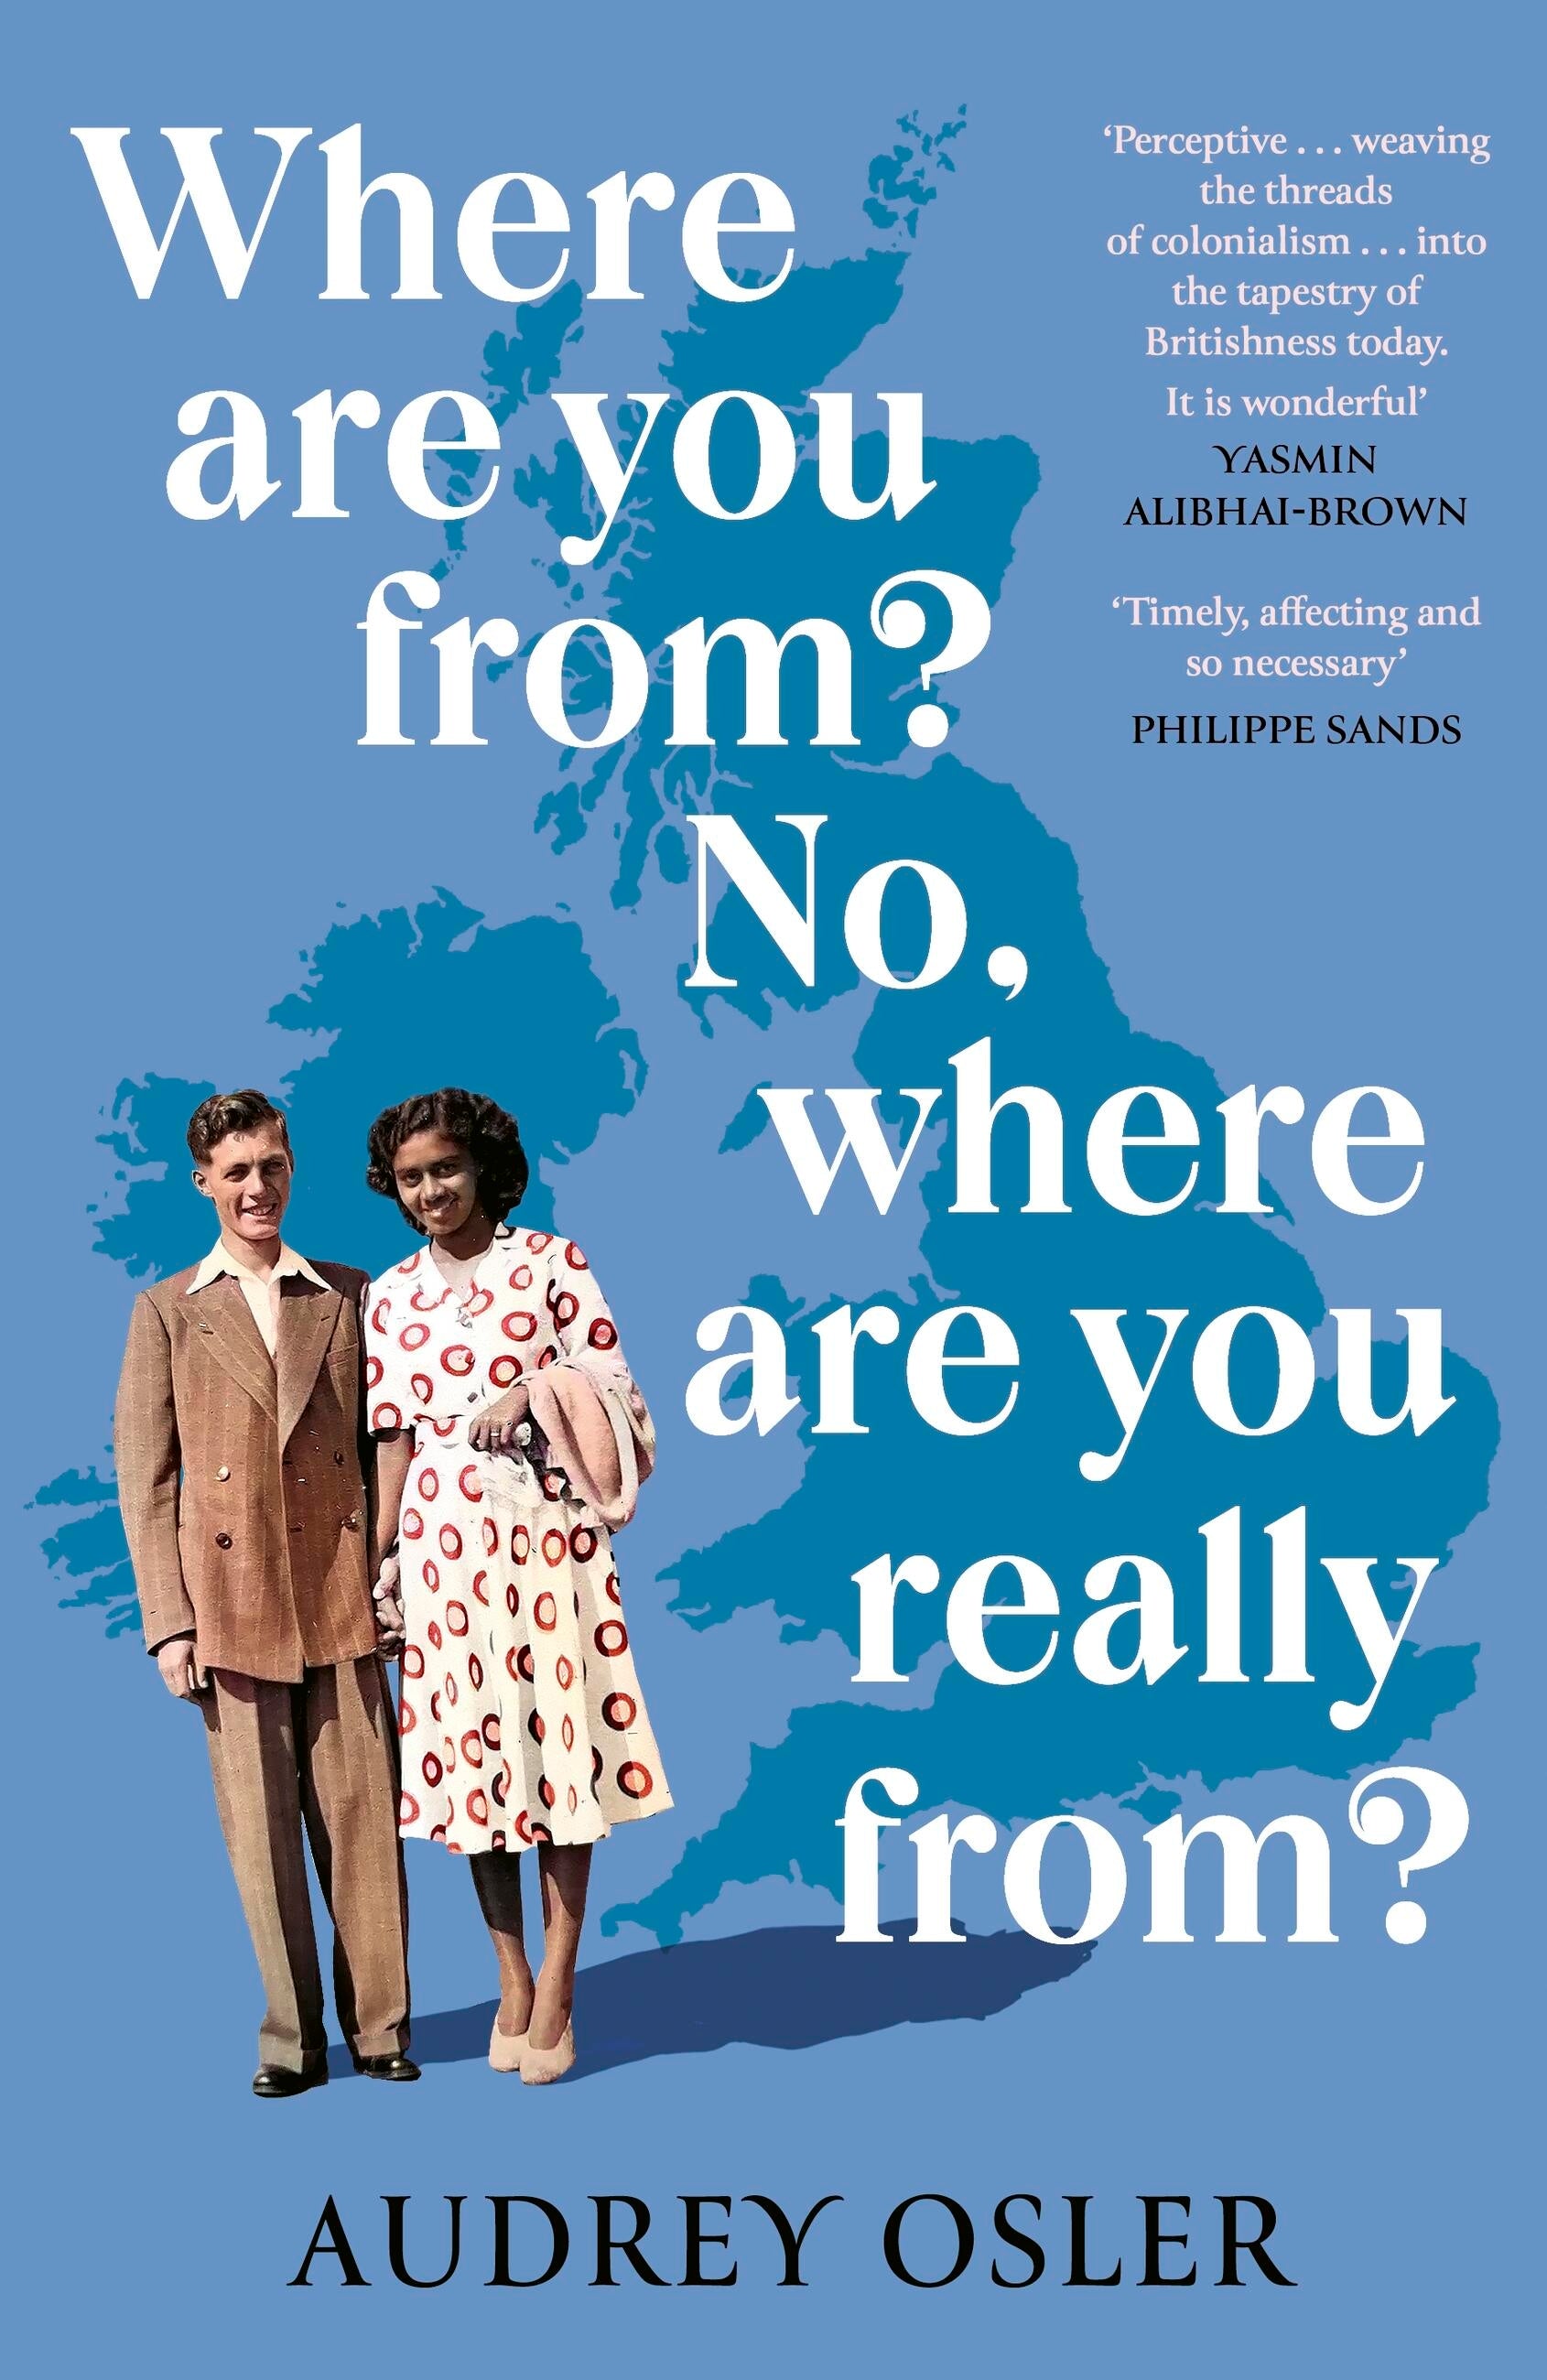 Where Are You From? No, Where are You Really From? by Audrey Osler